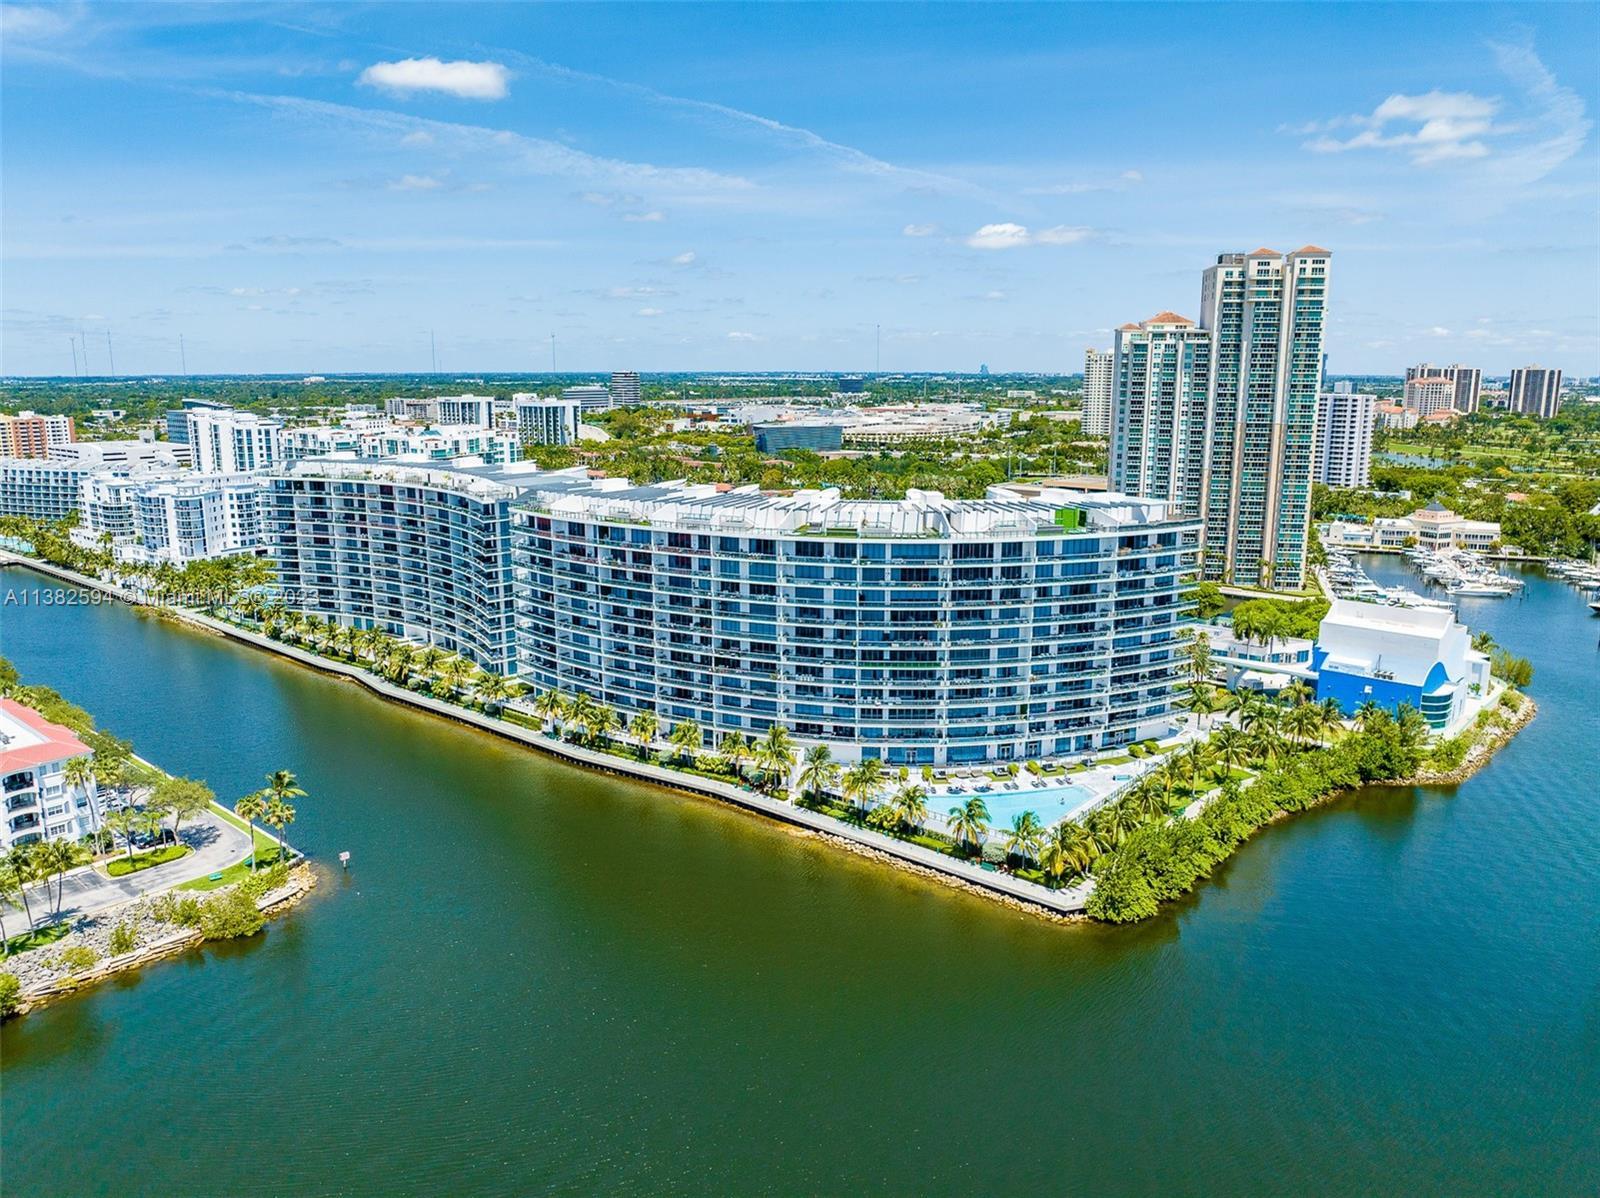 Rarely available at Echo Aventura, one of most desirable locations to live in Fl, this is one of kin